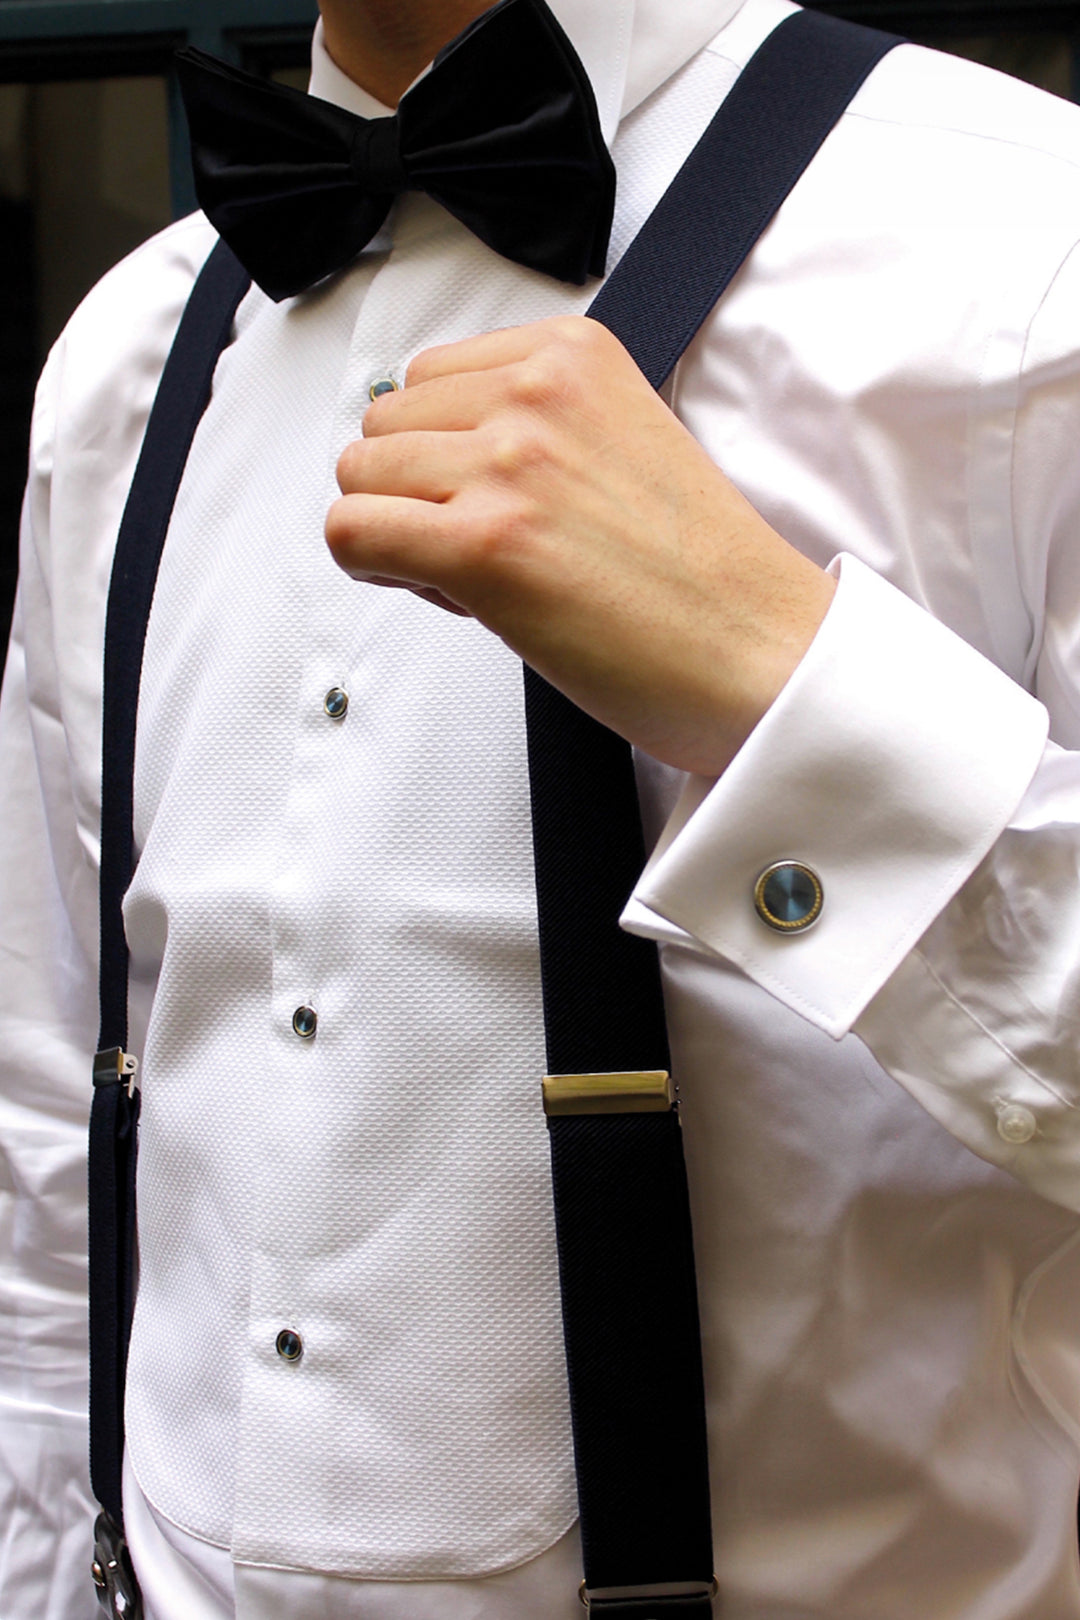 Fitted tuxedo shirt with collar